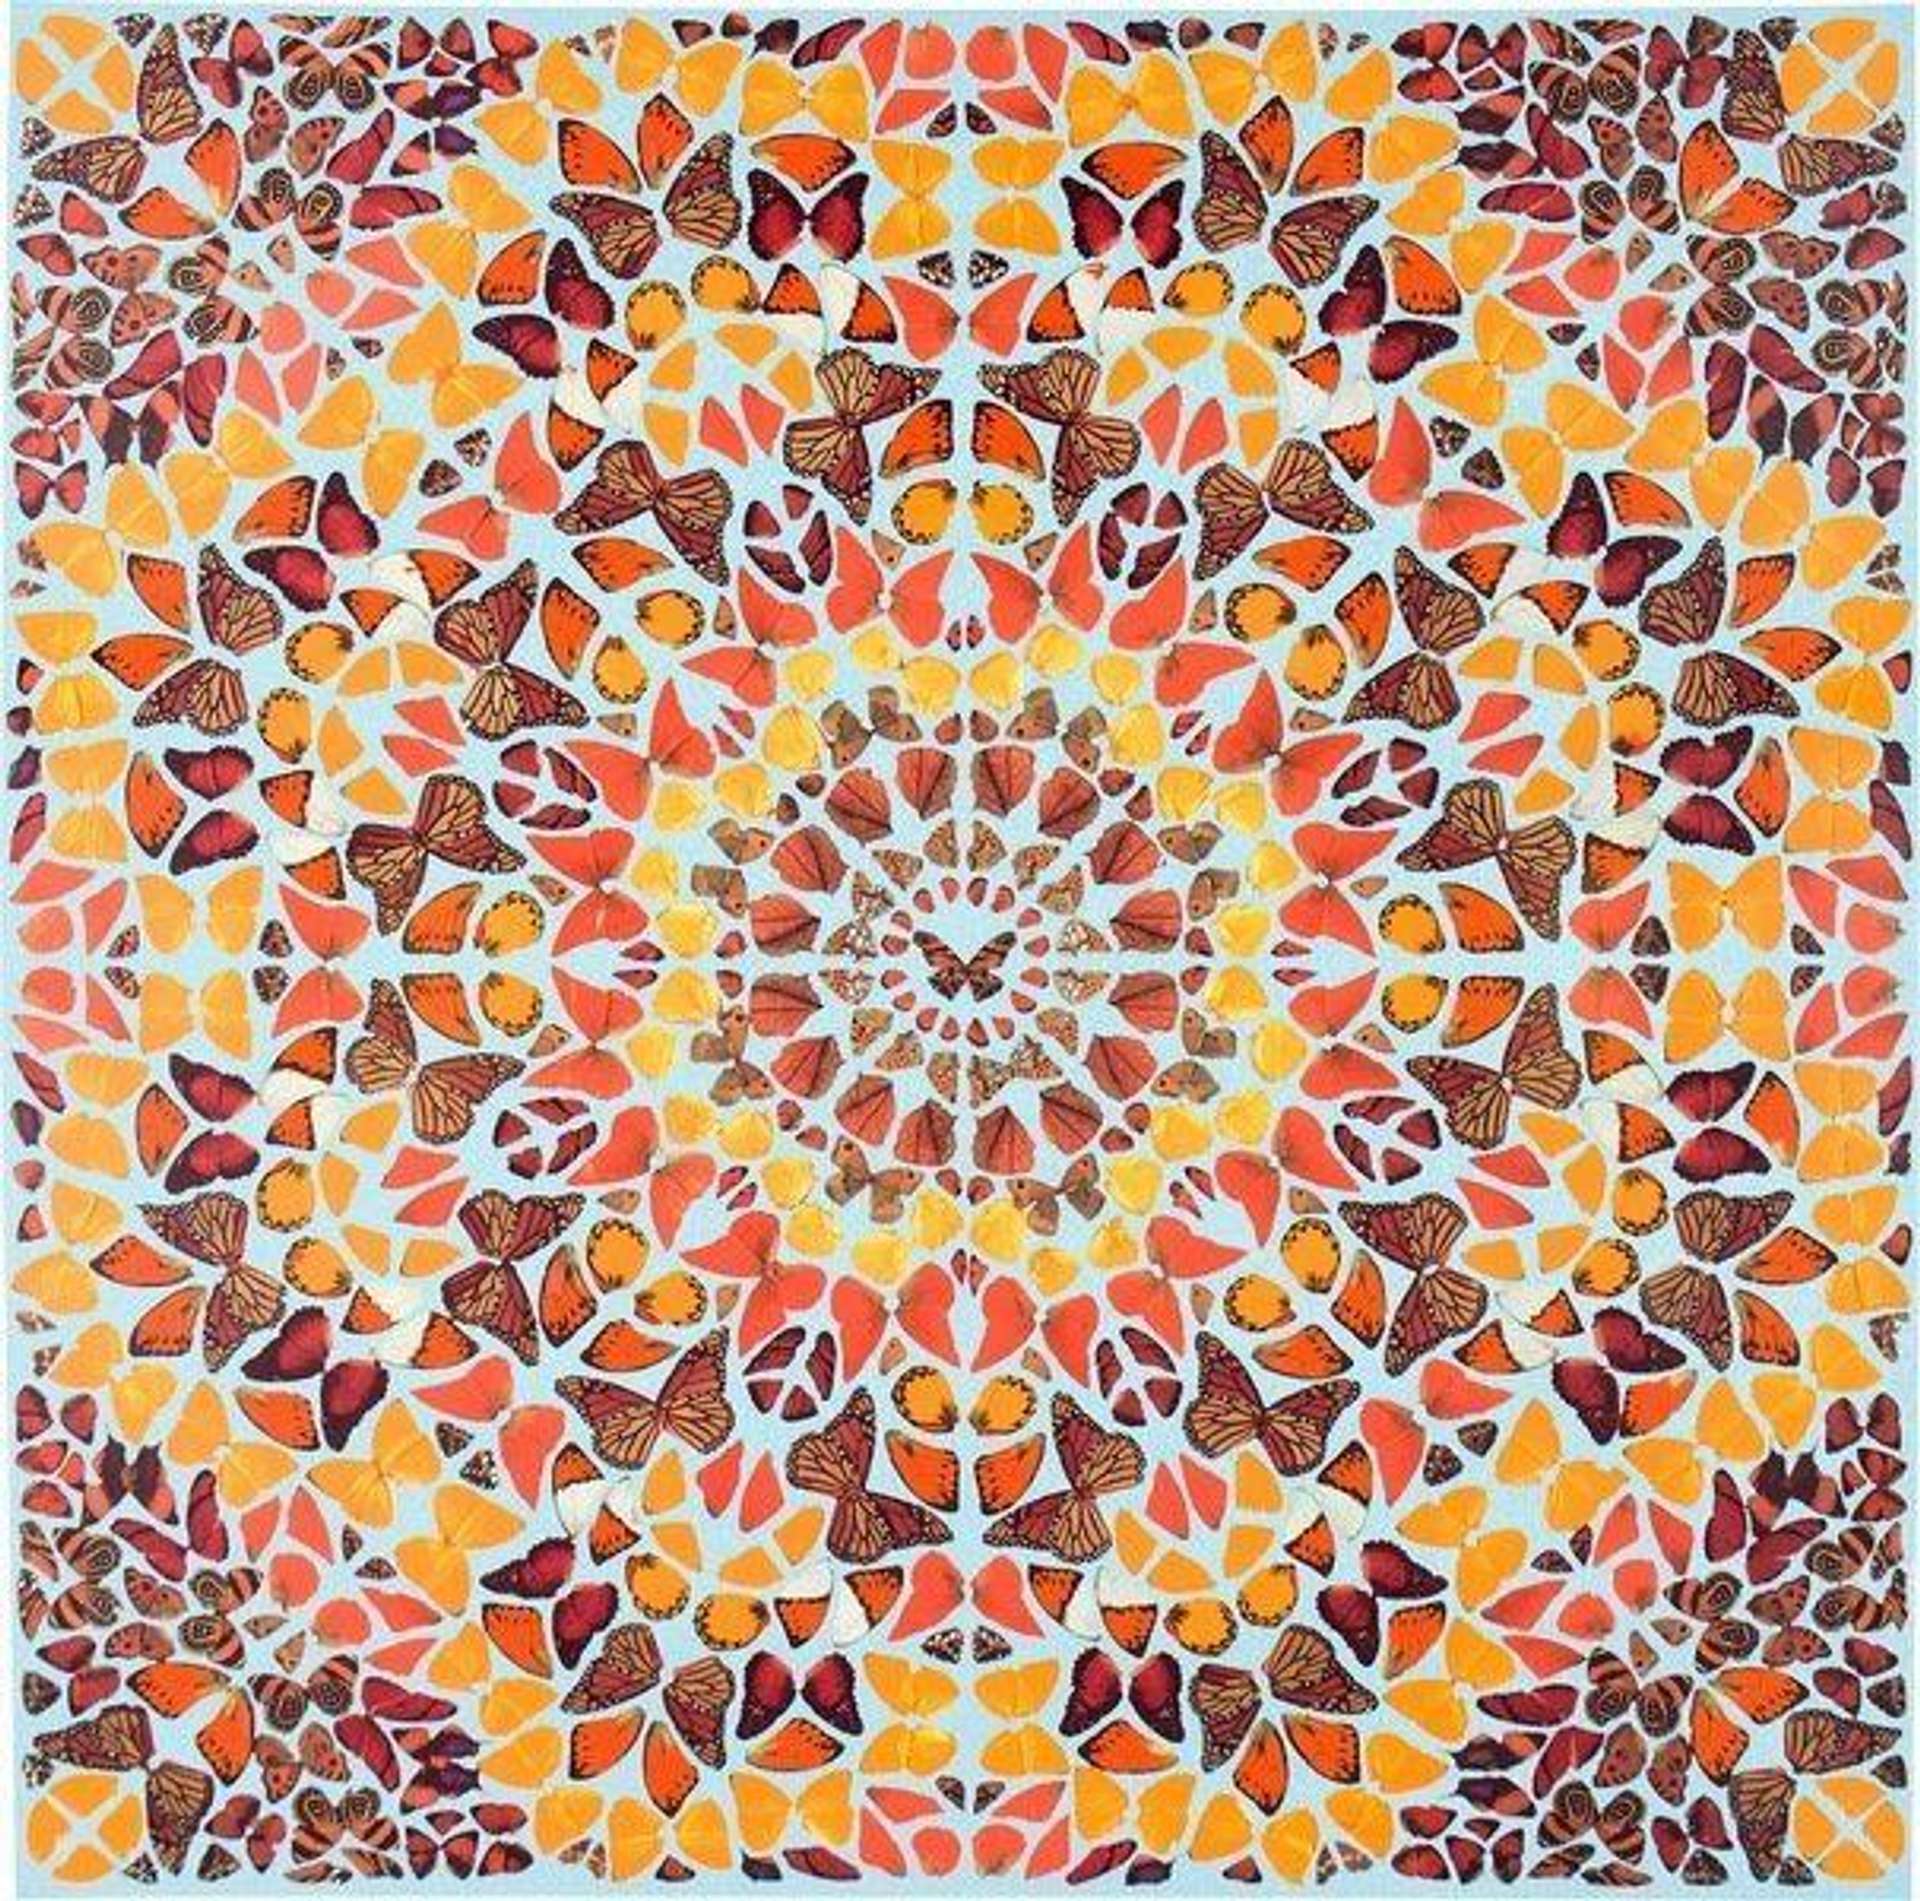 This print by Damien Hirst shows a mesmerising pattern of red, orange and brown butterflies. The autumnal colours used here by Hirst imbue the print with a sense of warmth, making it an inviting and visually appealing print. The intricate pattern is rendered on a square canvas and consists of concentric circles, with the butterflies emanating from a central red butterfly.